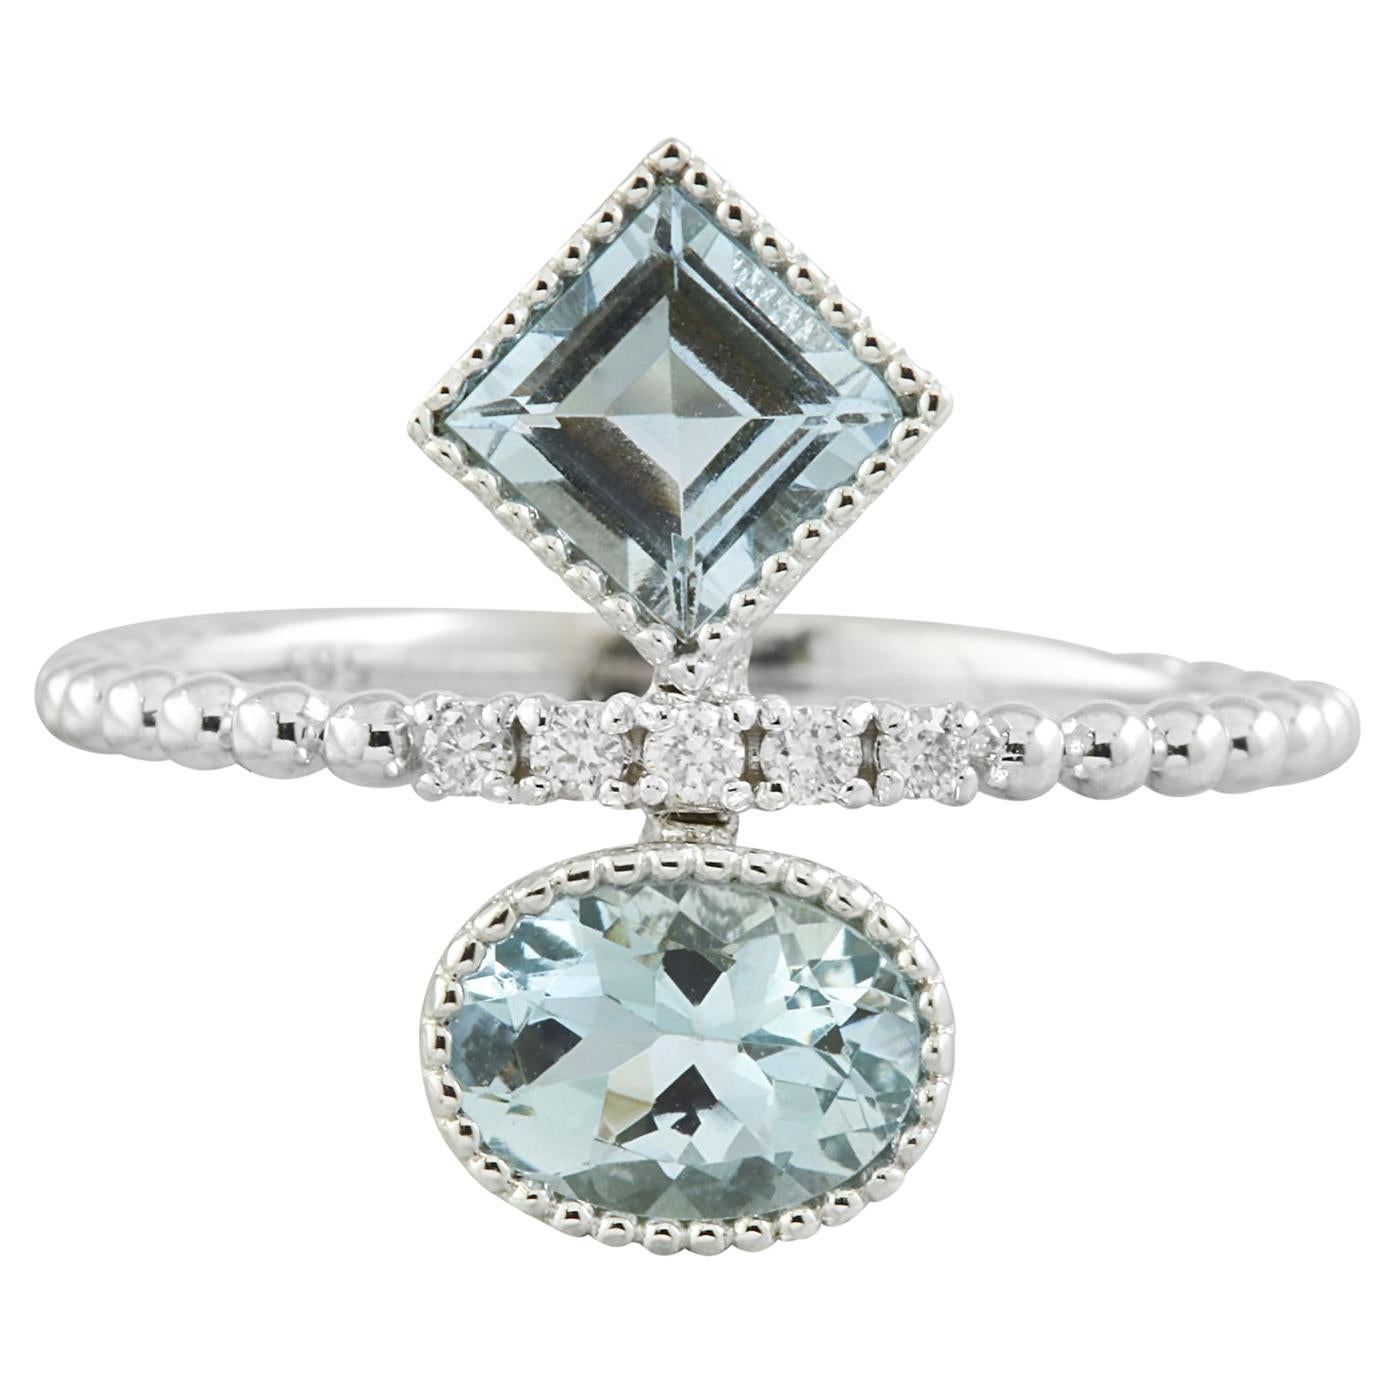 Dazzling Aquamarine Diamond Ring: Exquisite Beauty in 14K Solid White Gold For Sale